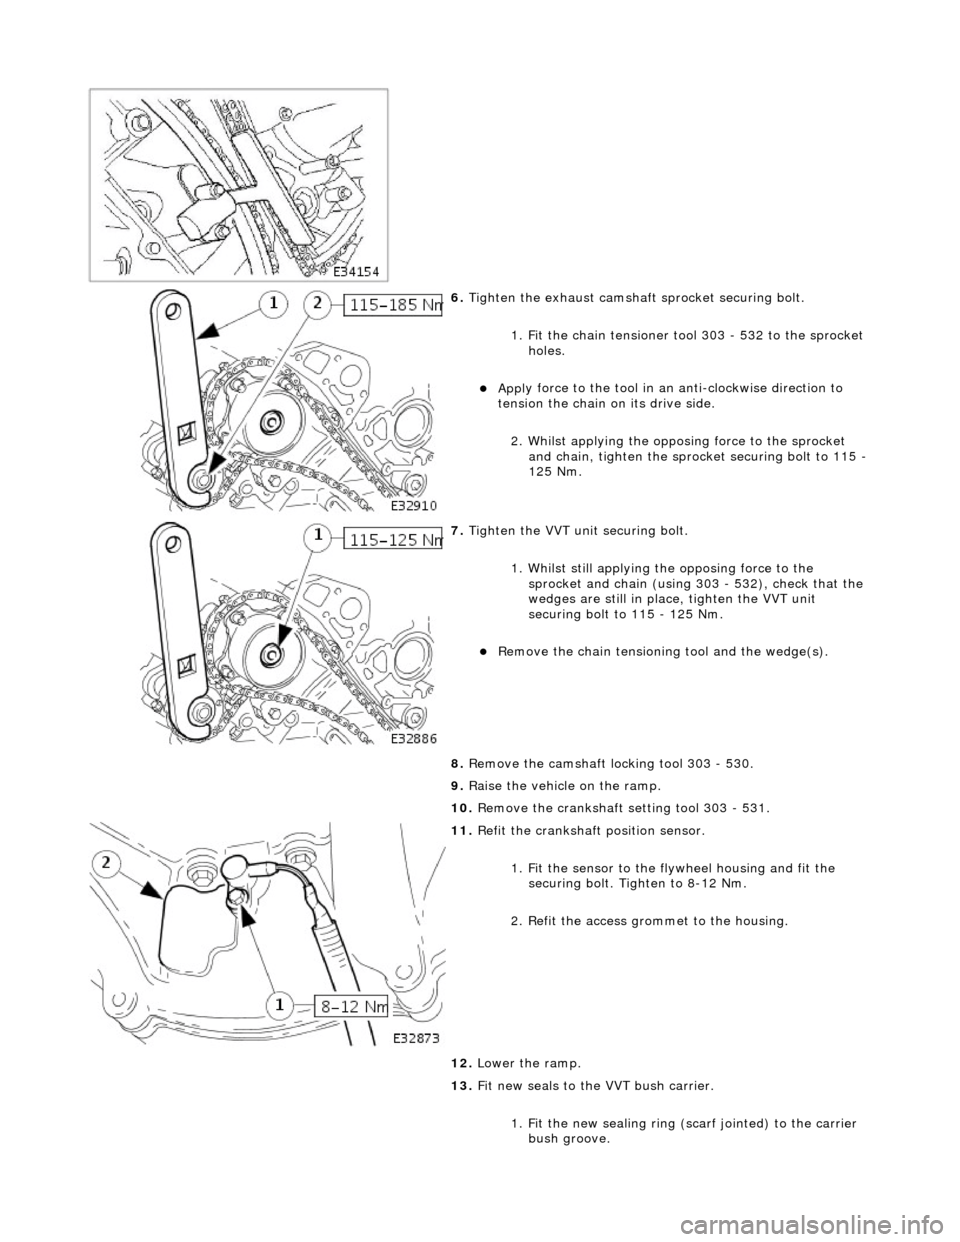 JAGUAR X308 1998 2.G Workshop Manual  
 
6. Tigh
 ten the exhaust camshaft
 sprocket securing bolt. 
1. Fit the chain tensioner tool 303 - 532 to the sprocket  holes. 
Appl
 y force to the tool in an
 anti-clockwise direction to 
tens